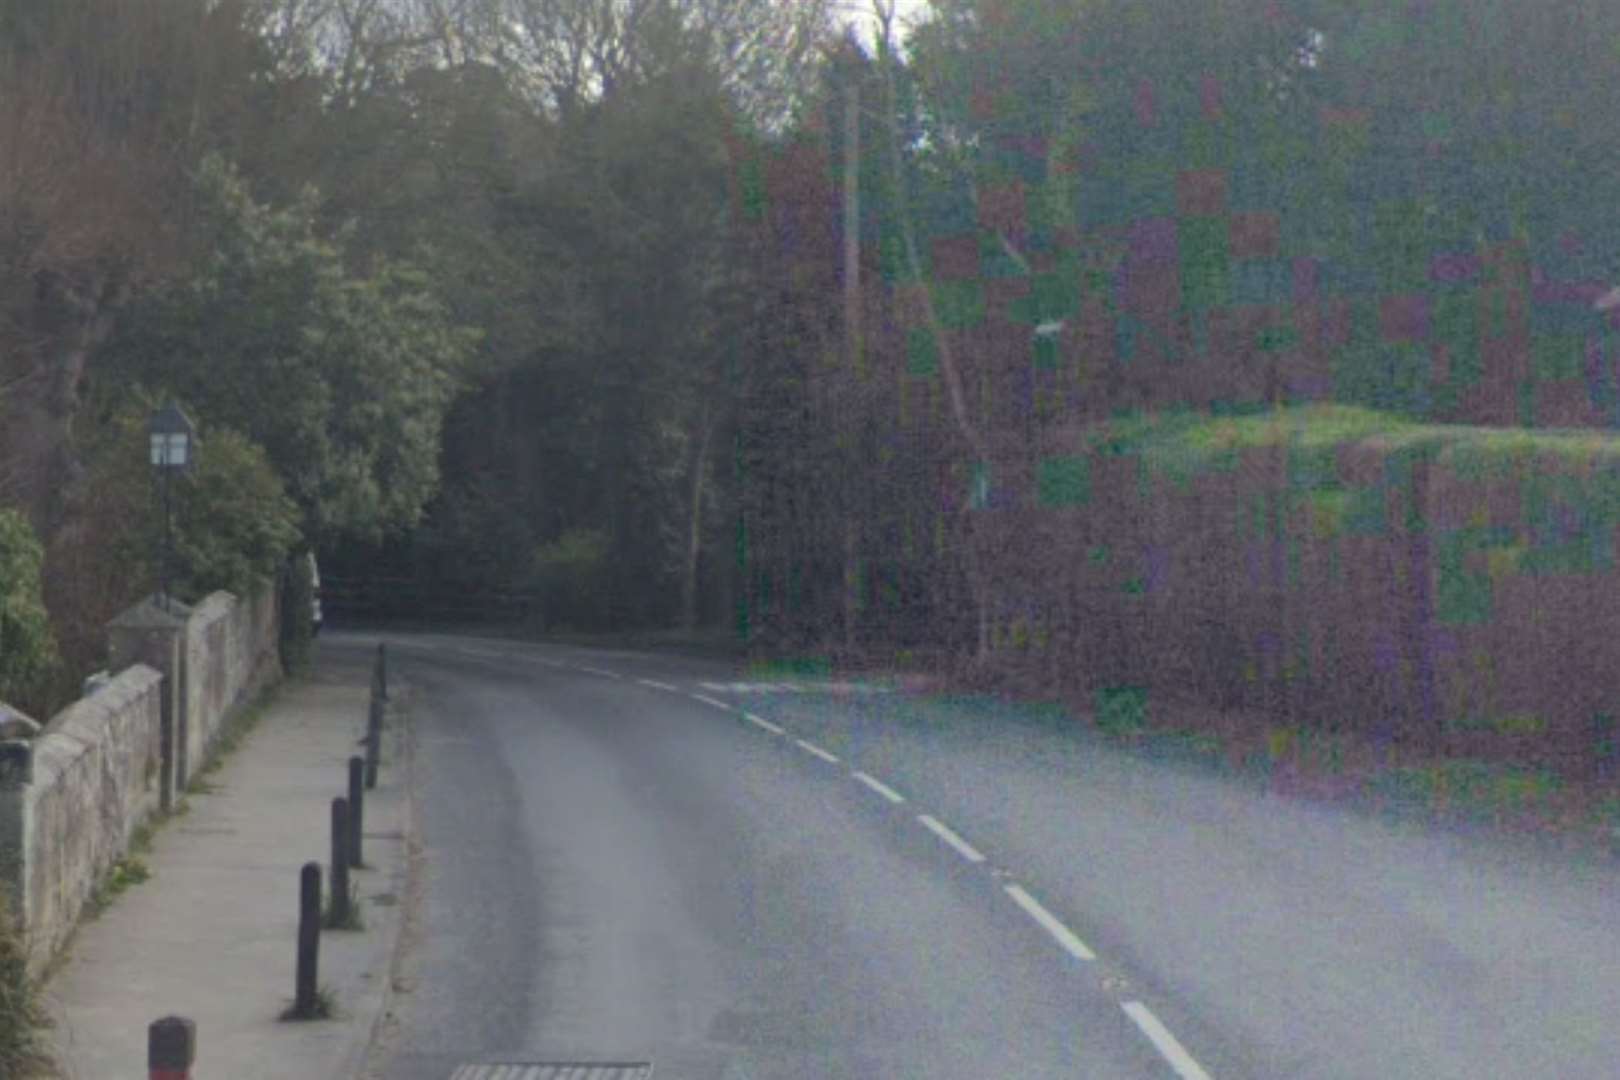 A biker has been caught at twice the speed limit on the A262 near Sissinghurst. Photo: Google Maps